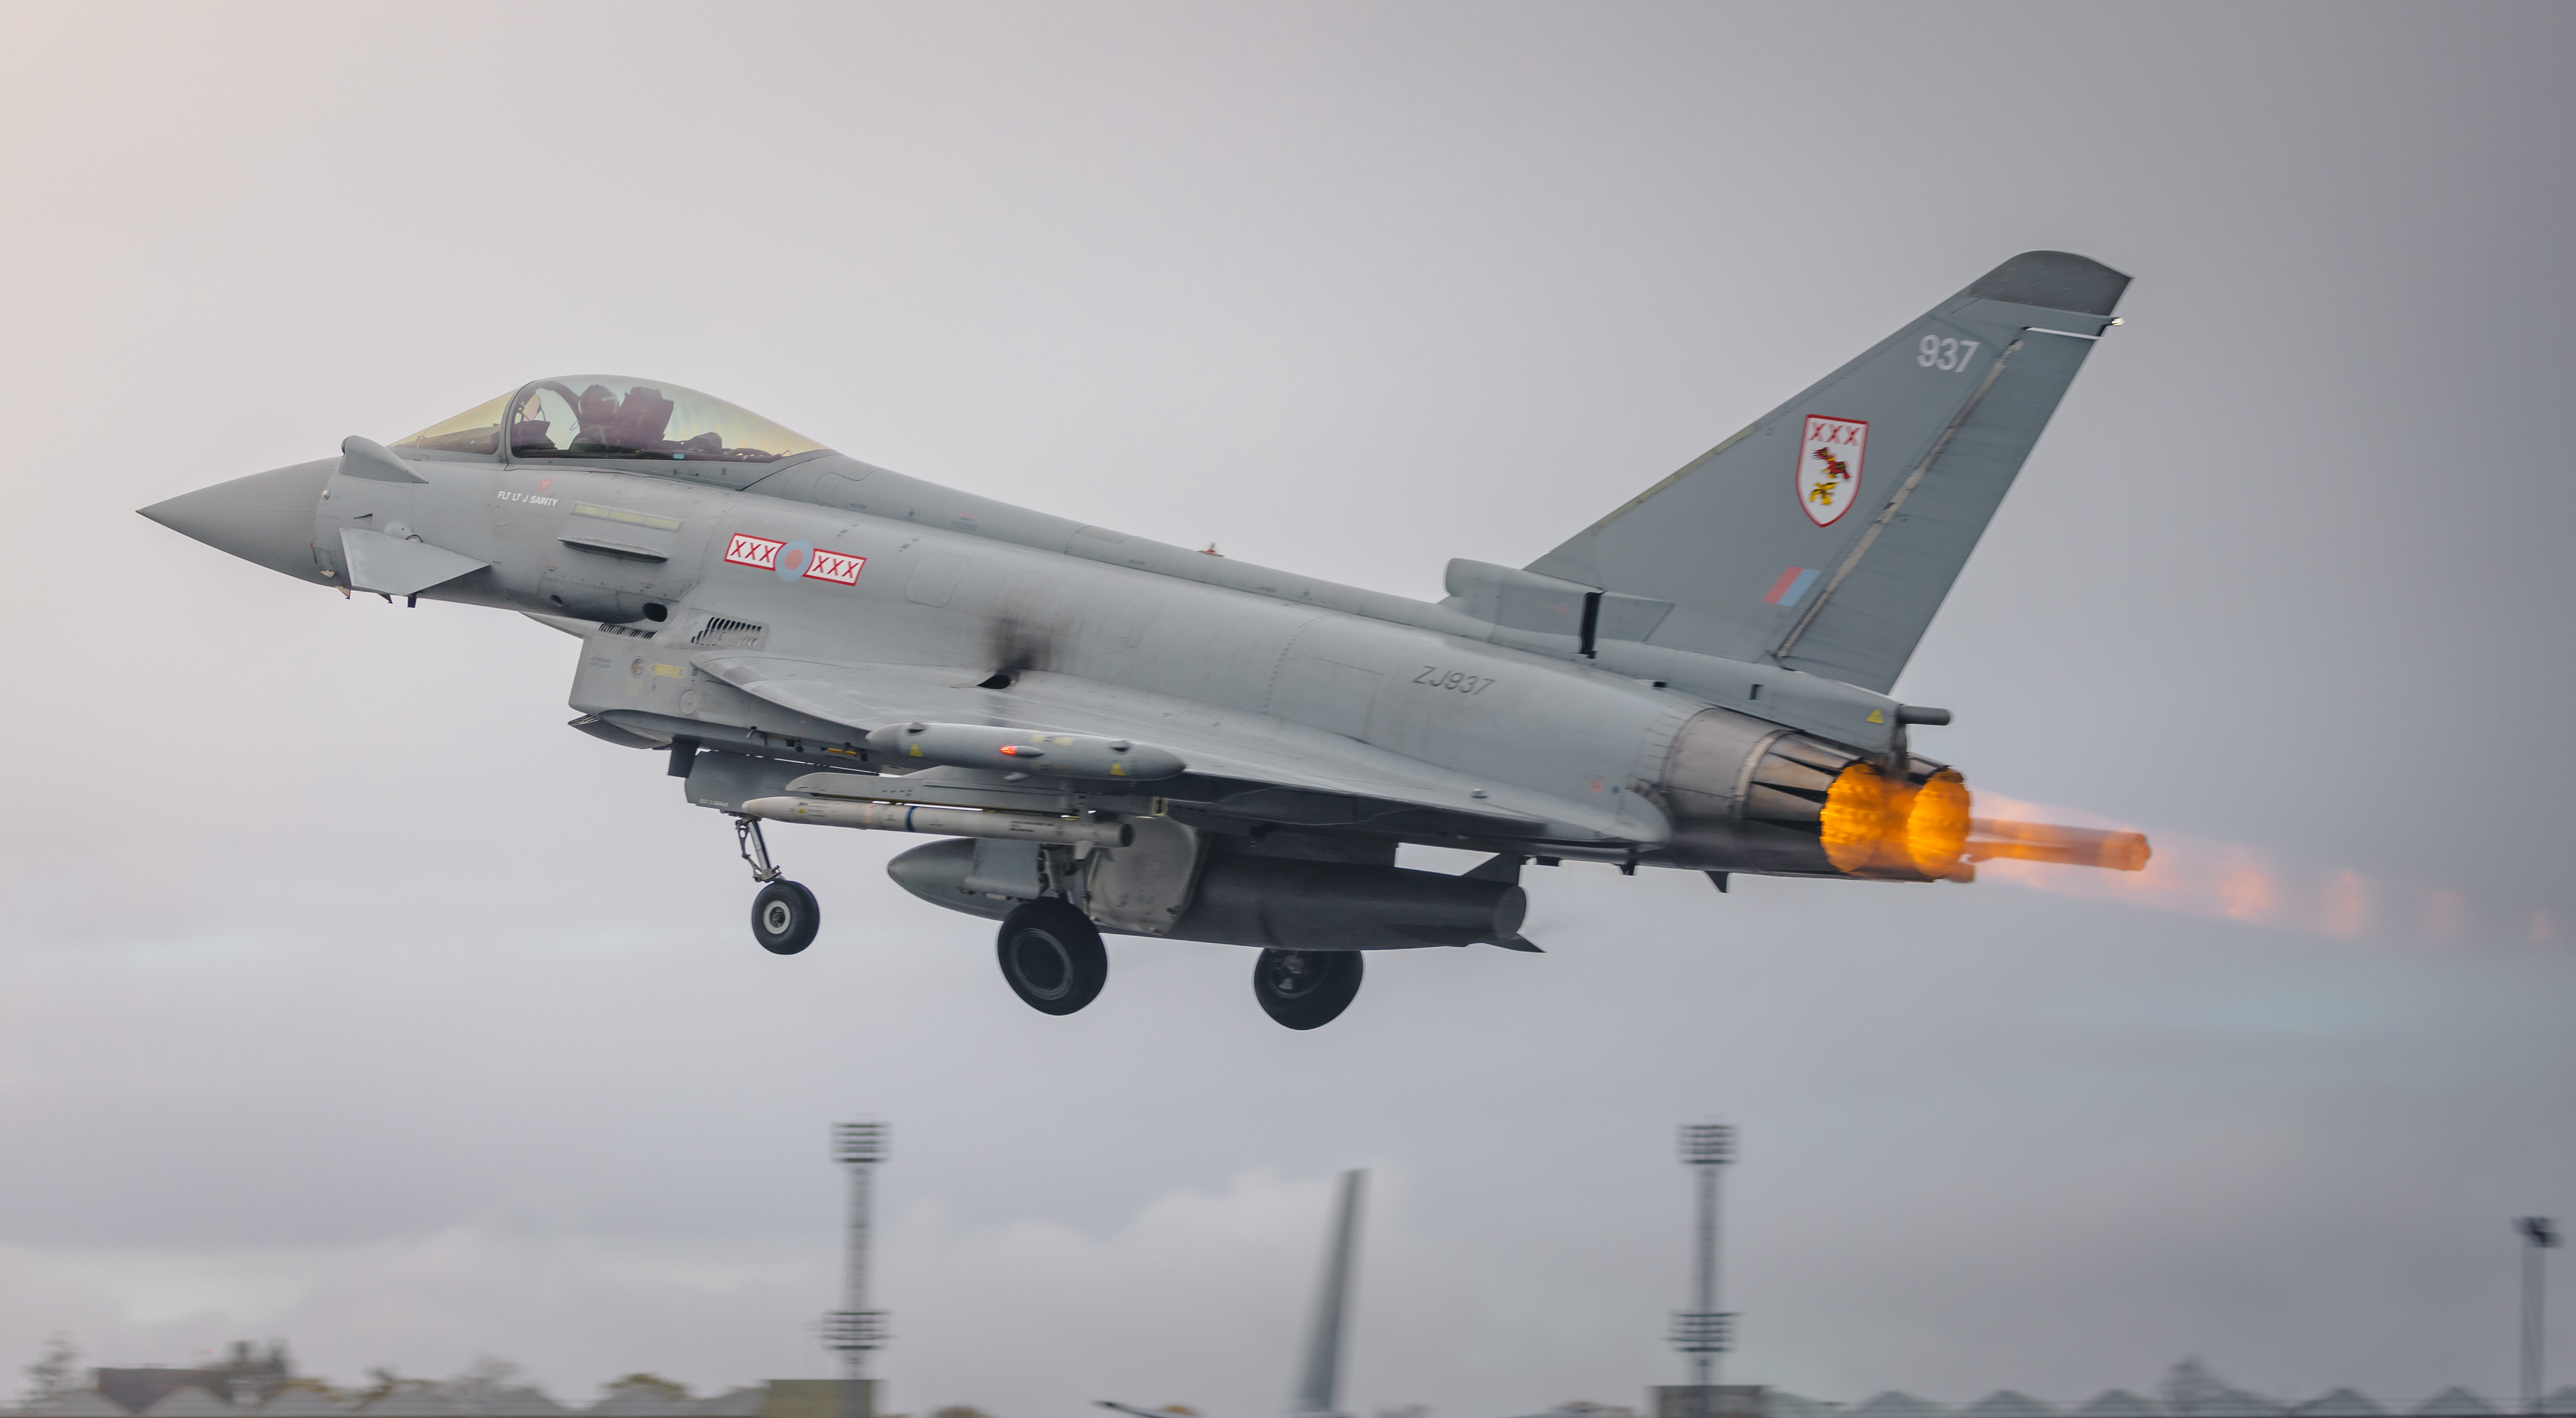 Image shows Typhoon taking off.